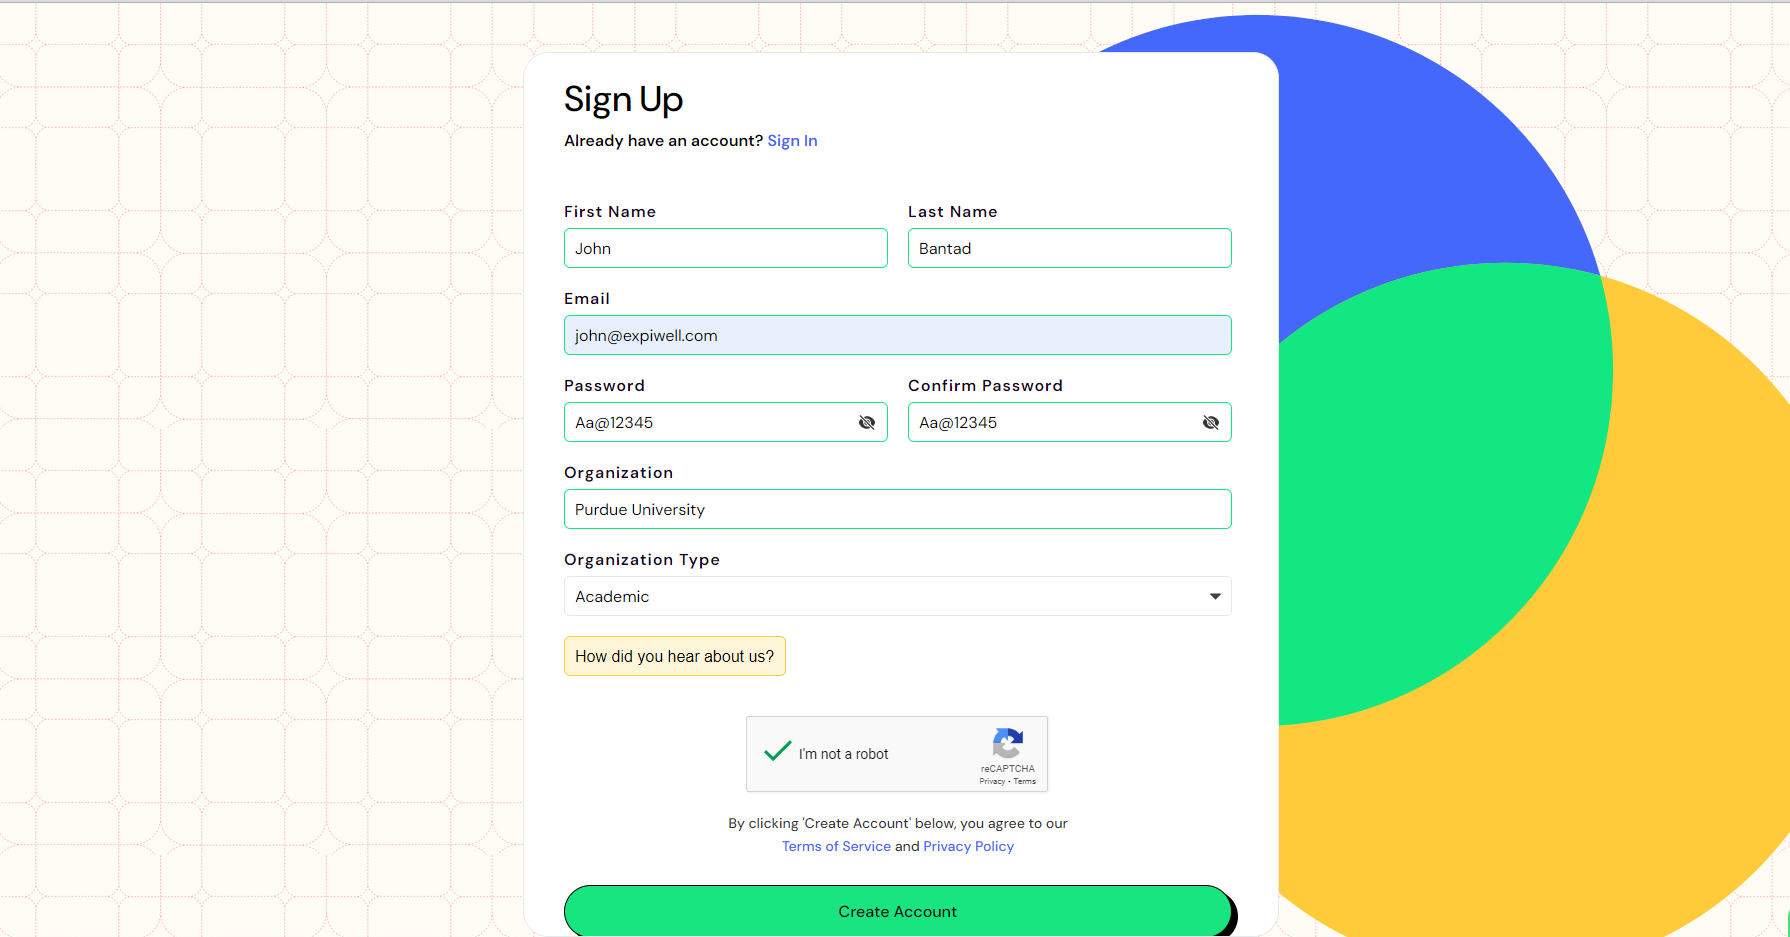 Sign Up page - 1